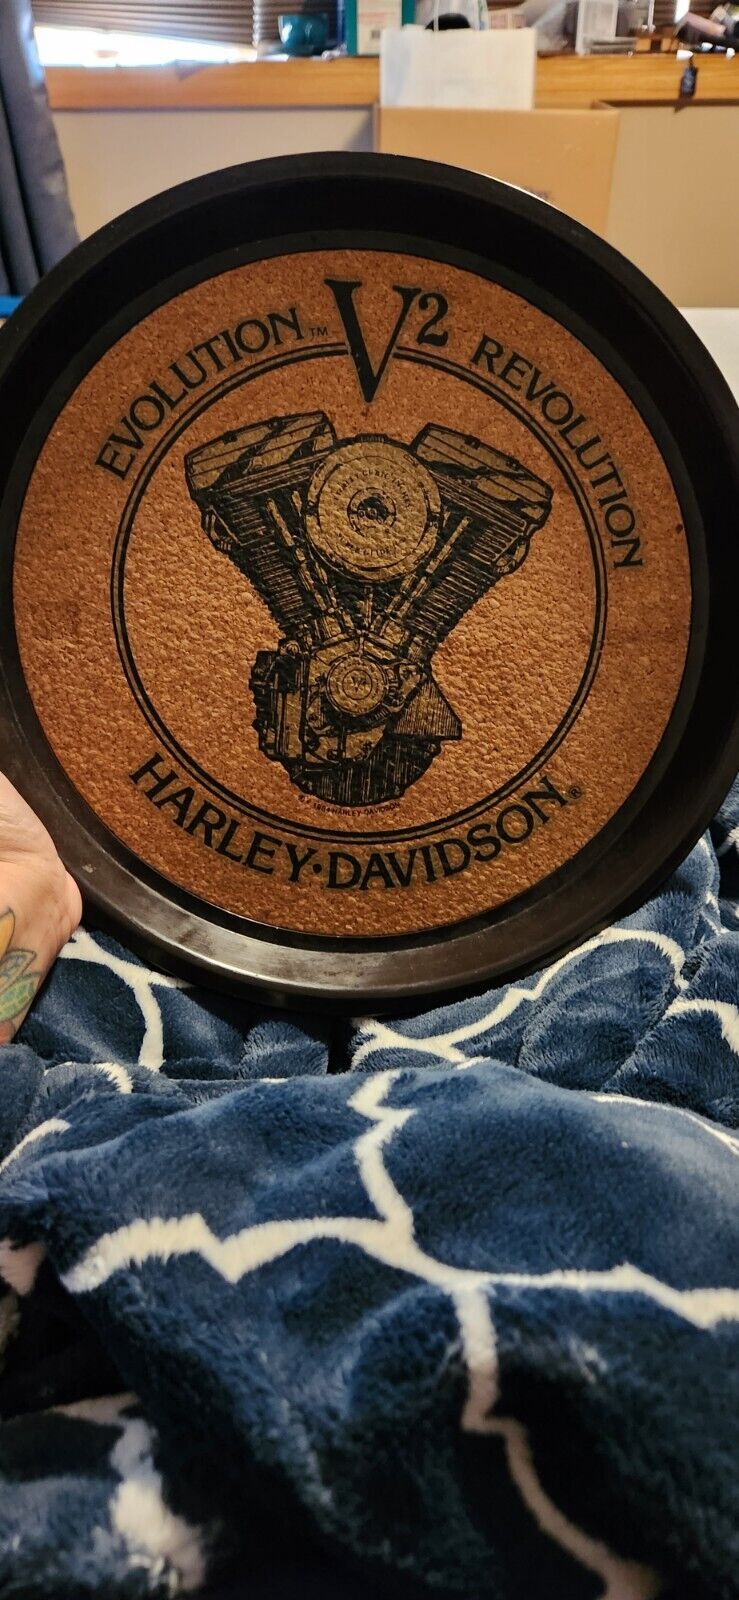 Harley-davidson 13 1/2” Round Serving Beer Tray Good Condition!